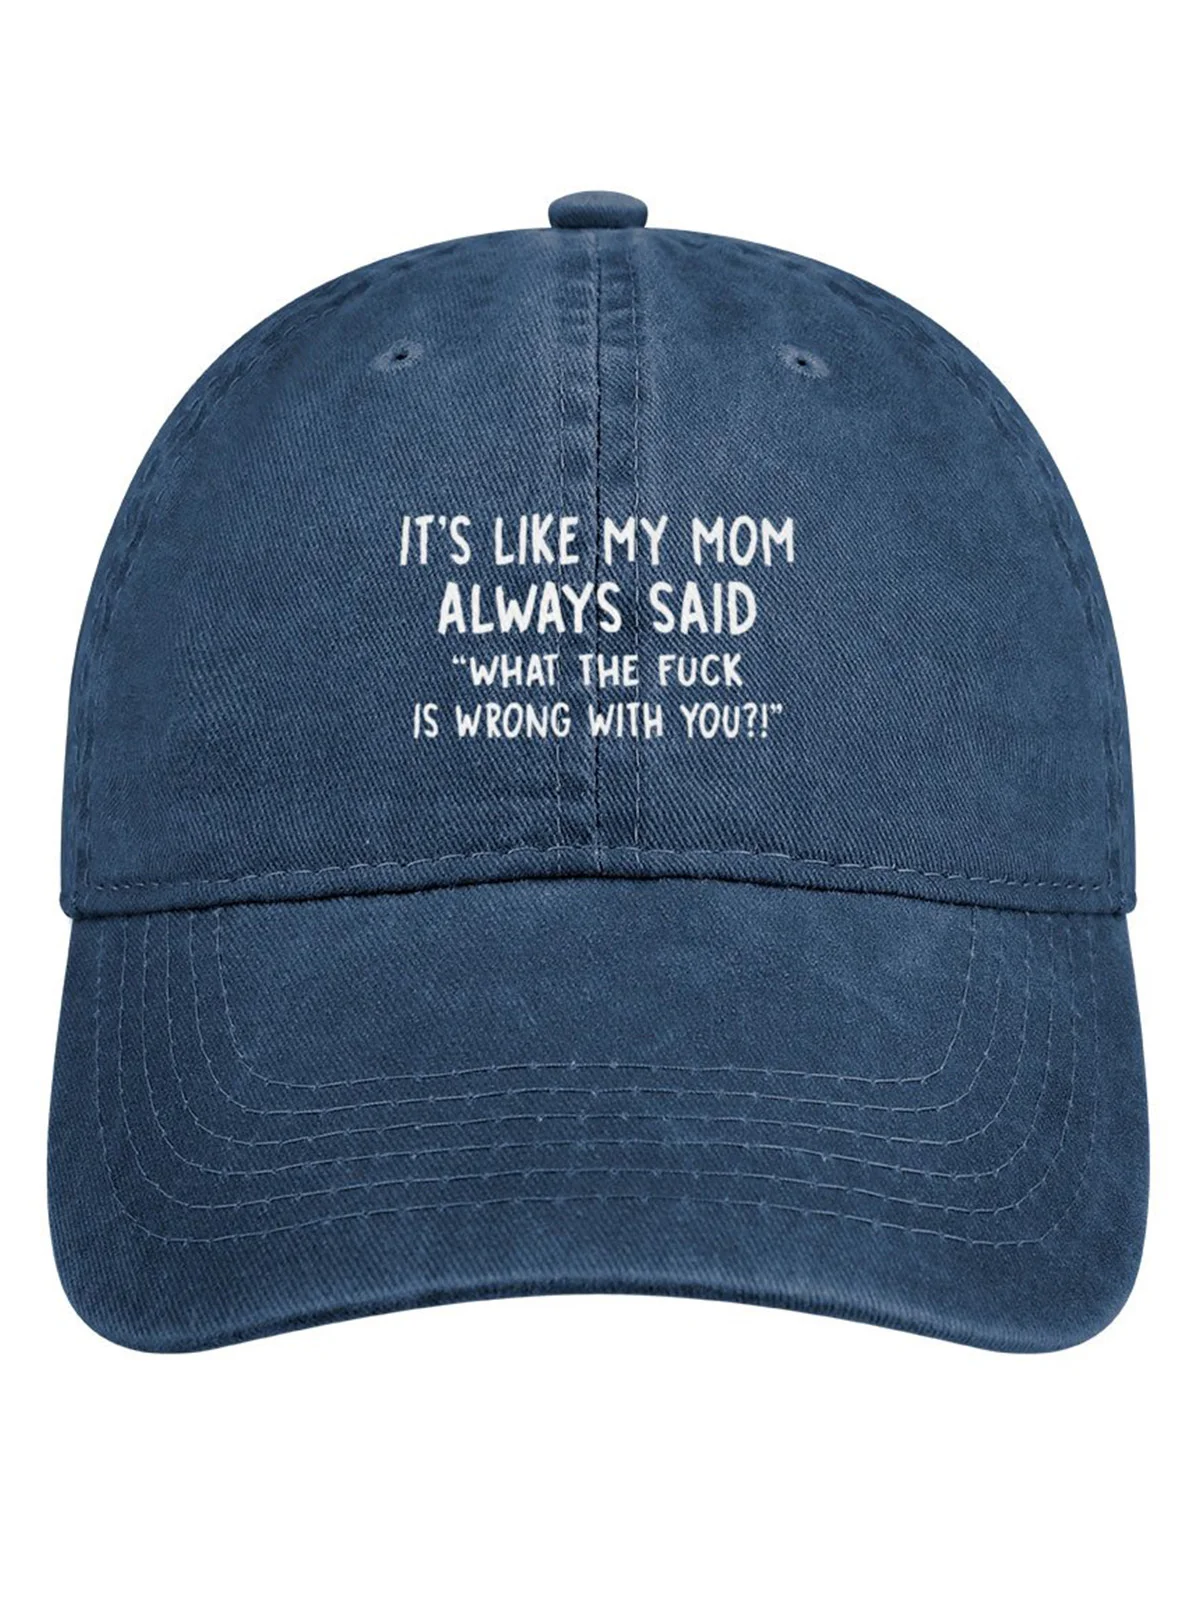 It’s Like My Mom Always Said What The Fuck Is Wrong With You Denim Hat